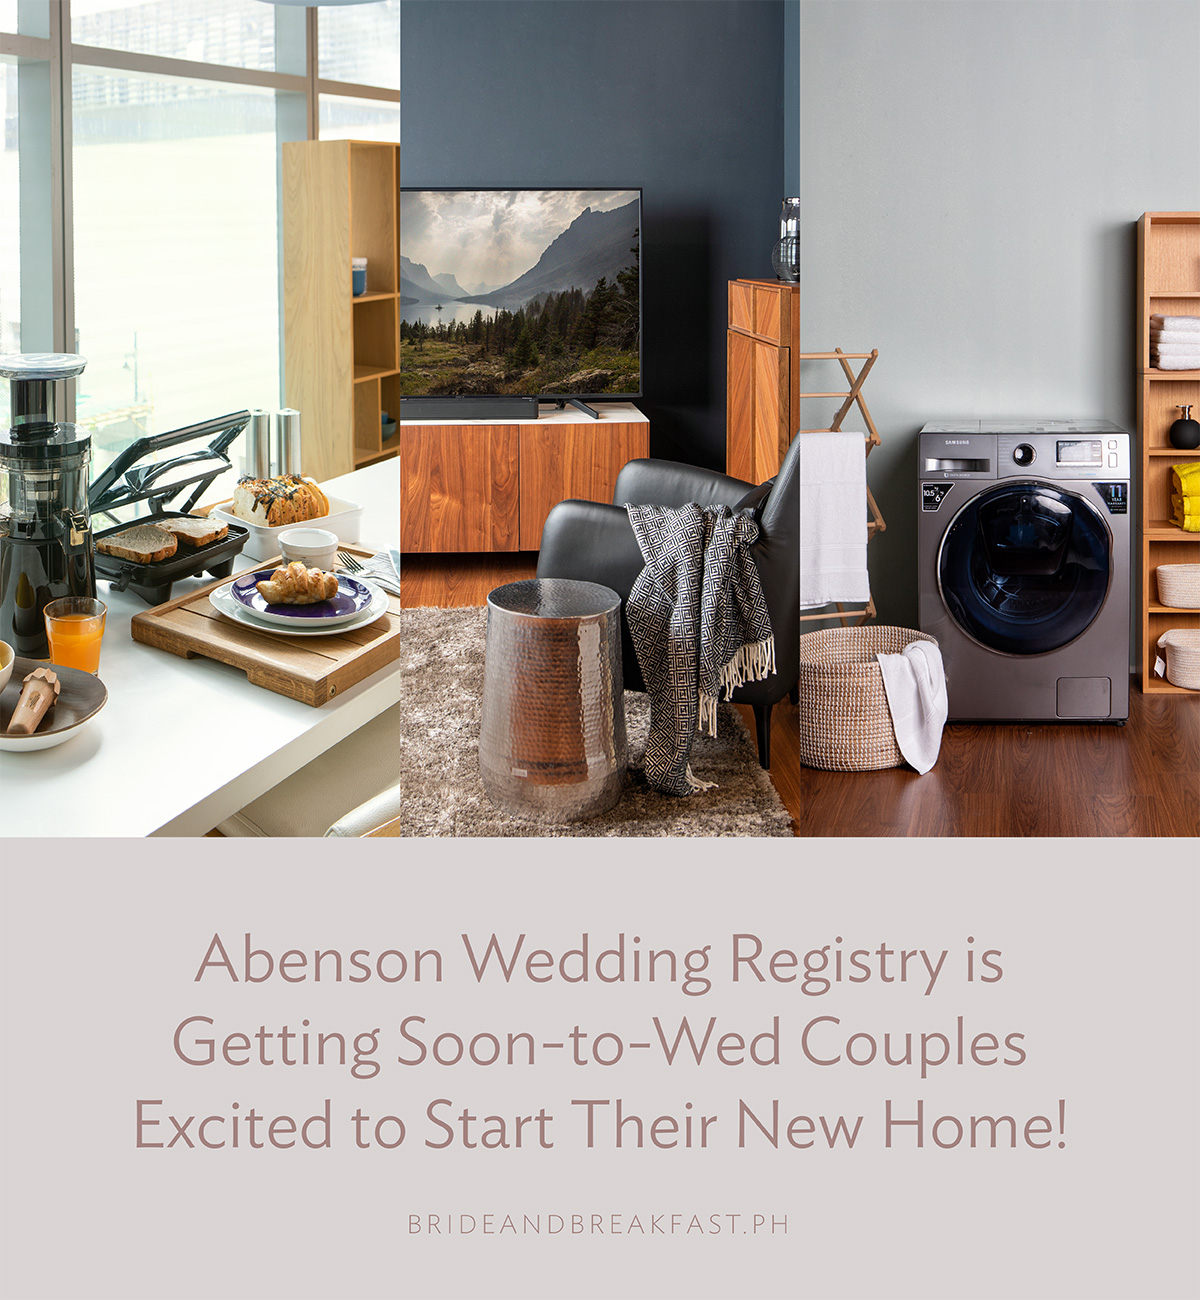 Abenson Wedding Registry is Getting Soon-to-Wed Couples Excited to Start Their New Home!